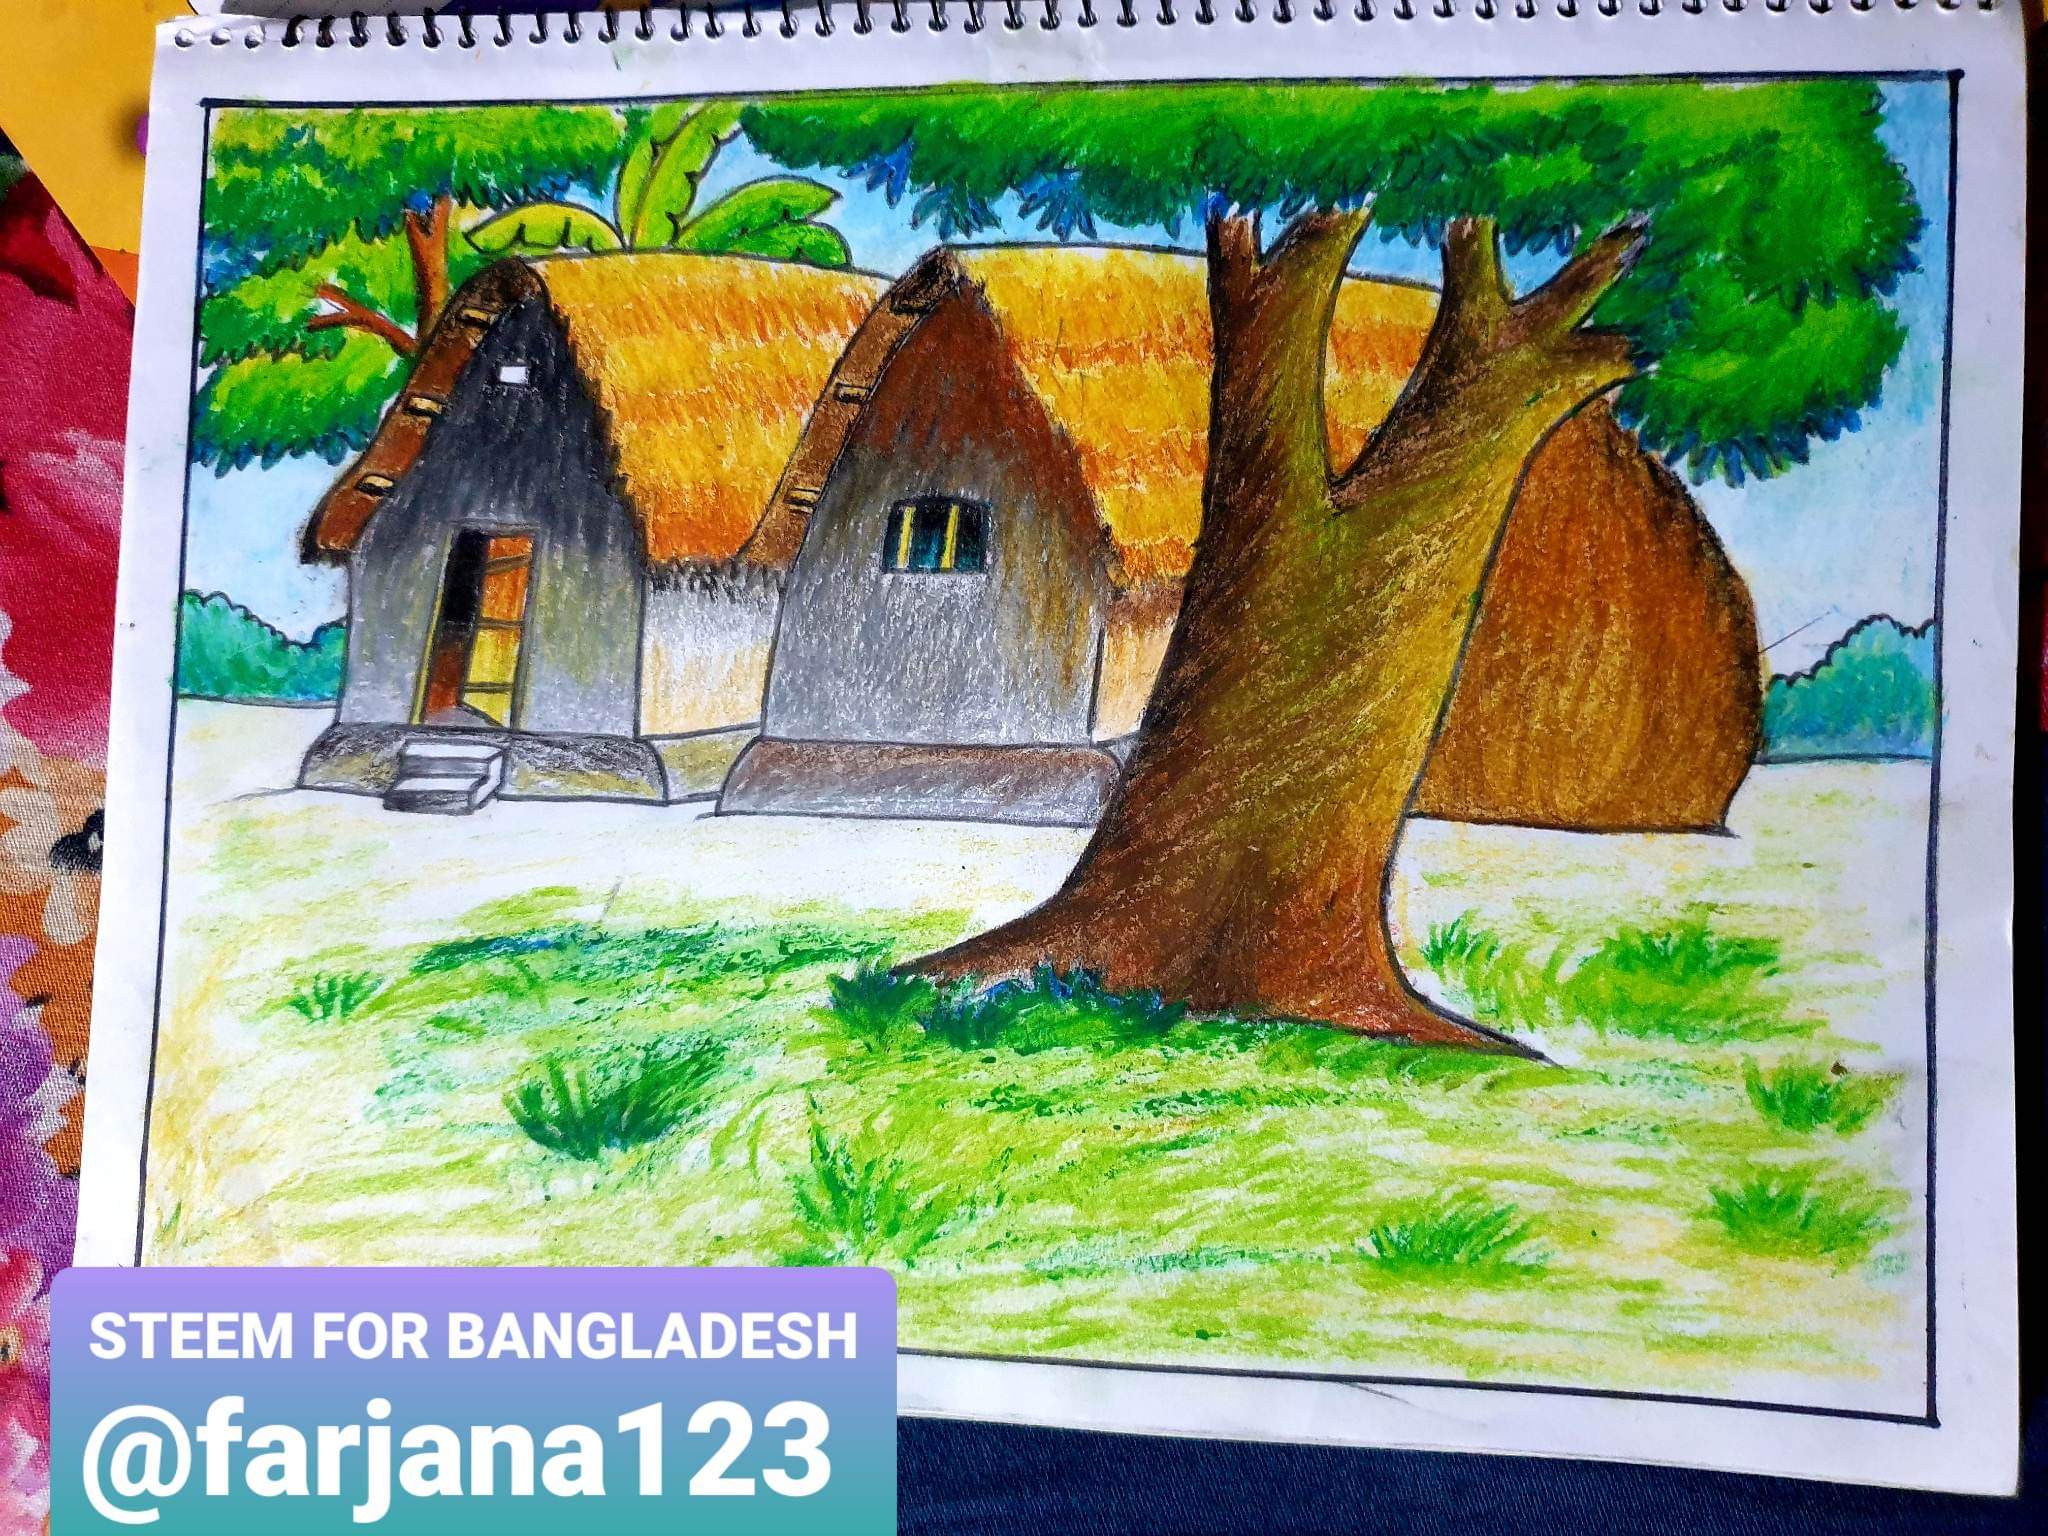 Stone Huts, Manali: Live your childhood drawings in reality - Tripoto